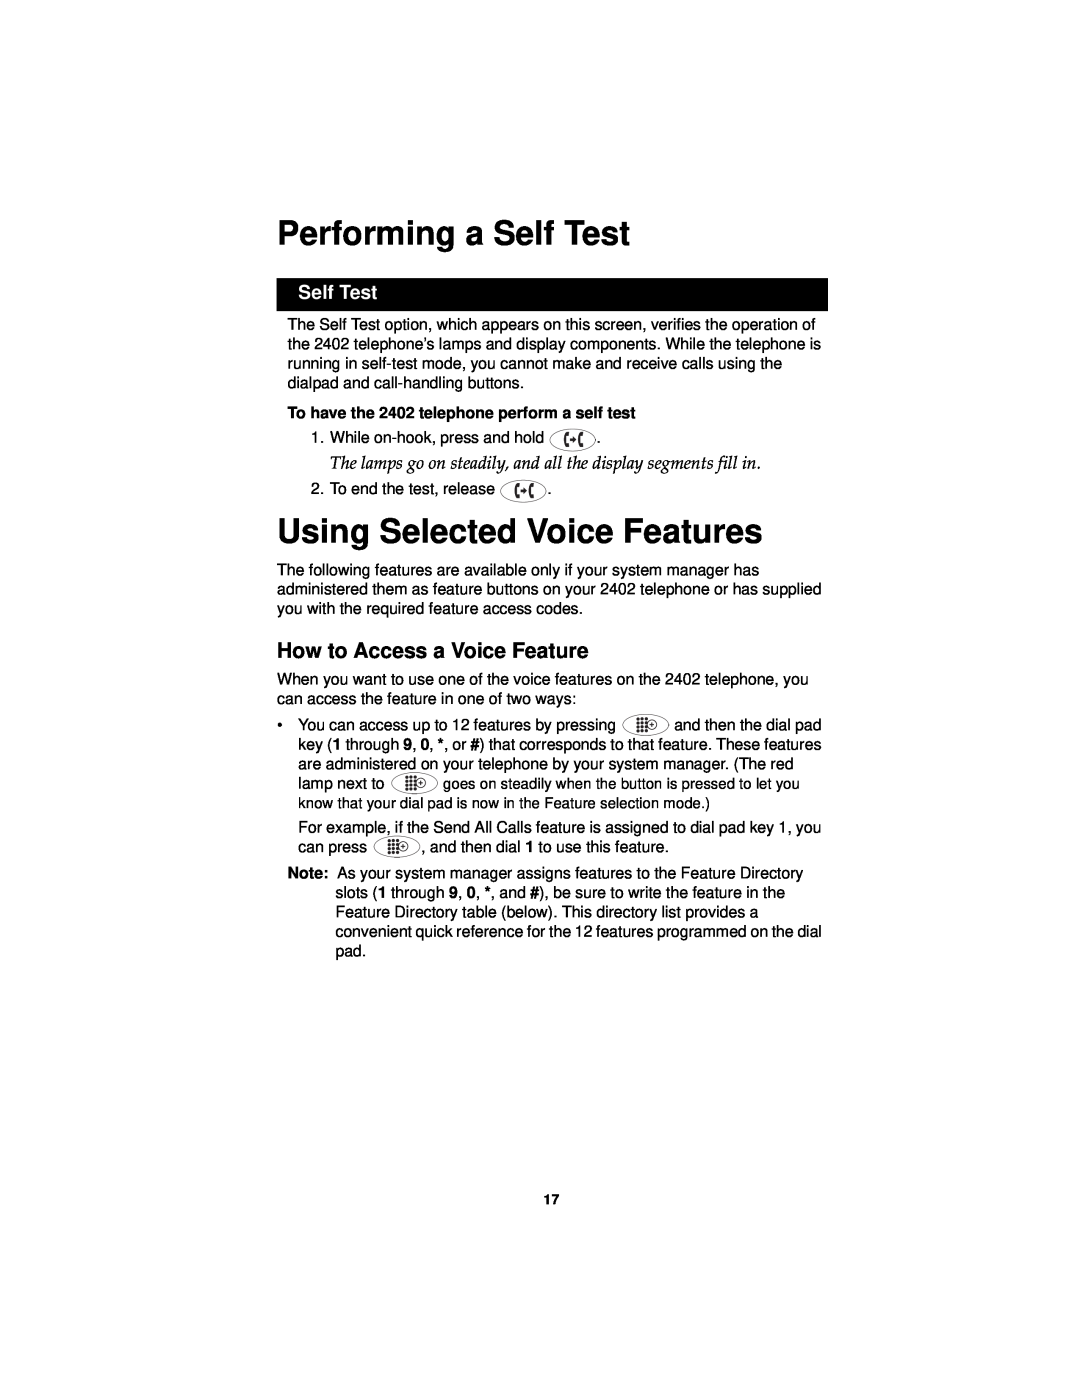 Avaya 2402 manual Performing a Self Test, Using Selected Voice Features, How to Access a Voice Feature 